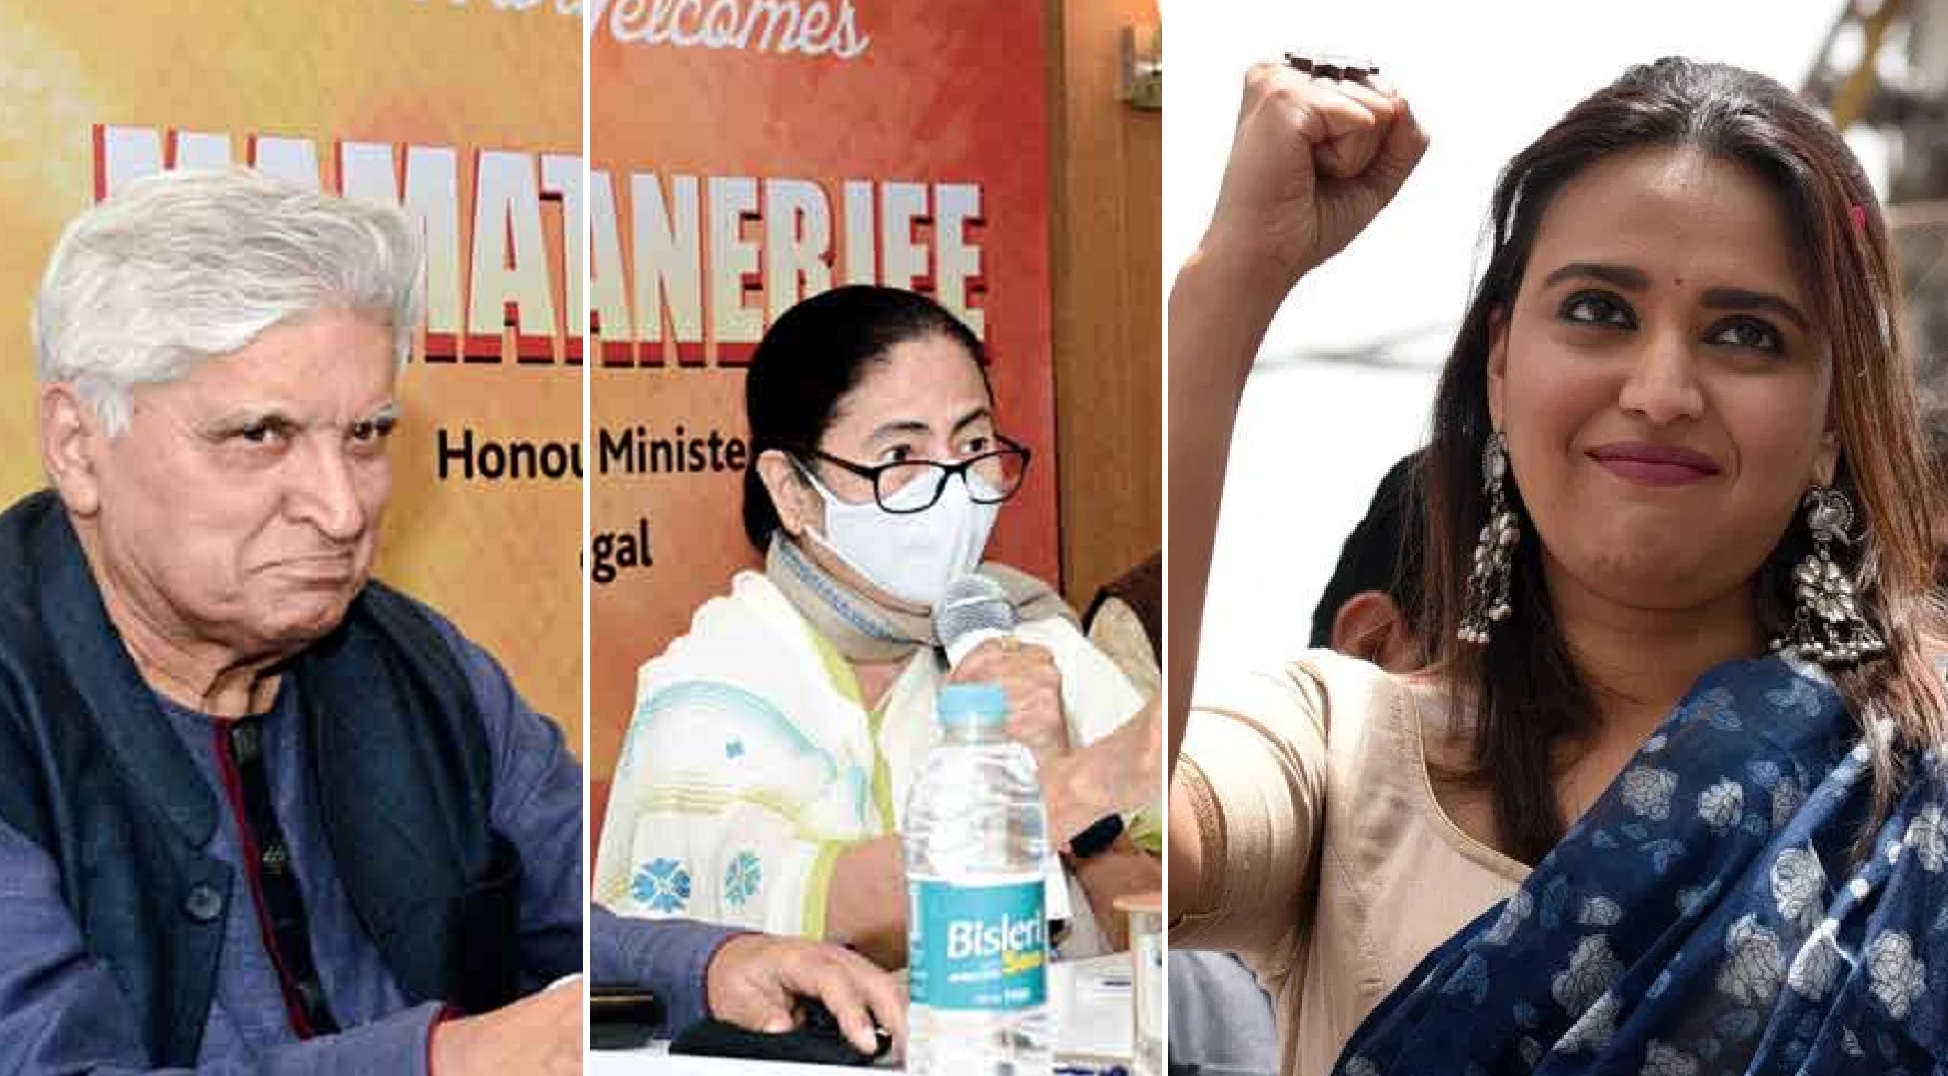 Mamta Banerjee Arrives In Mumbai, Welcomed By Javed Akhtar, Mahesh Bhatt & Swara Bhasker, ‘You Are The Face Of Hope For Us’